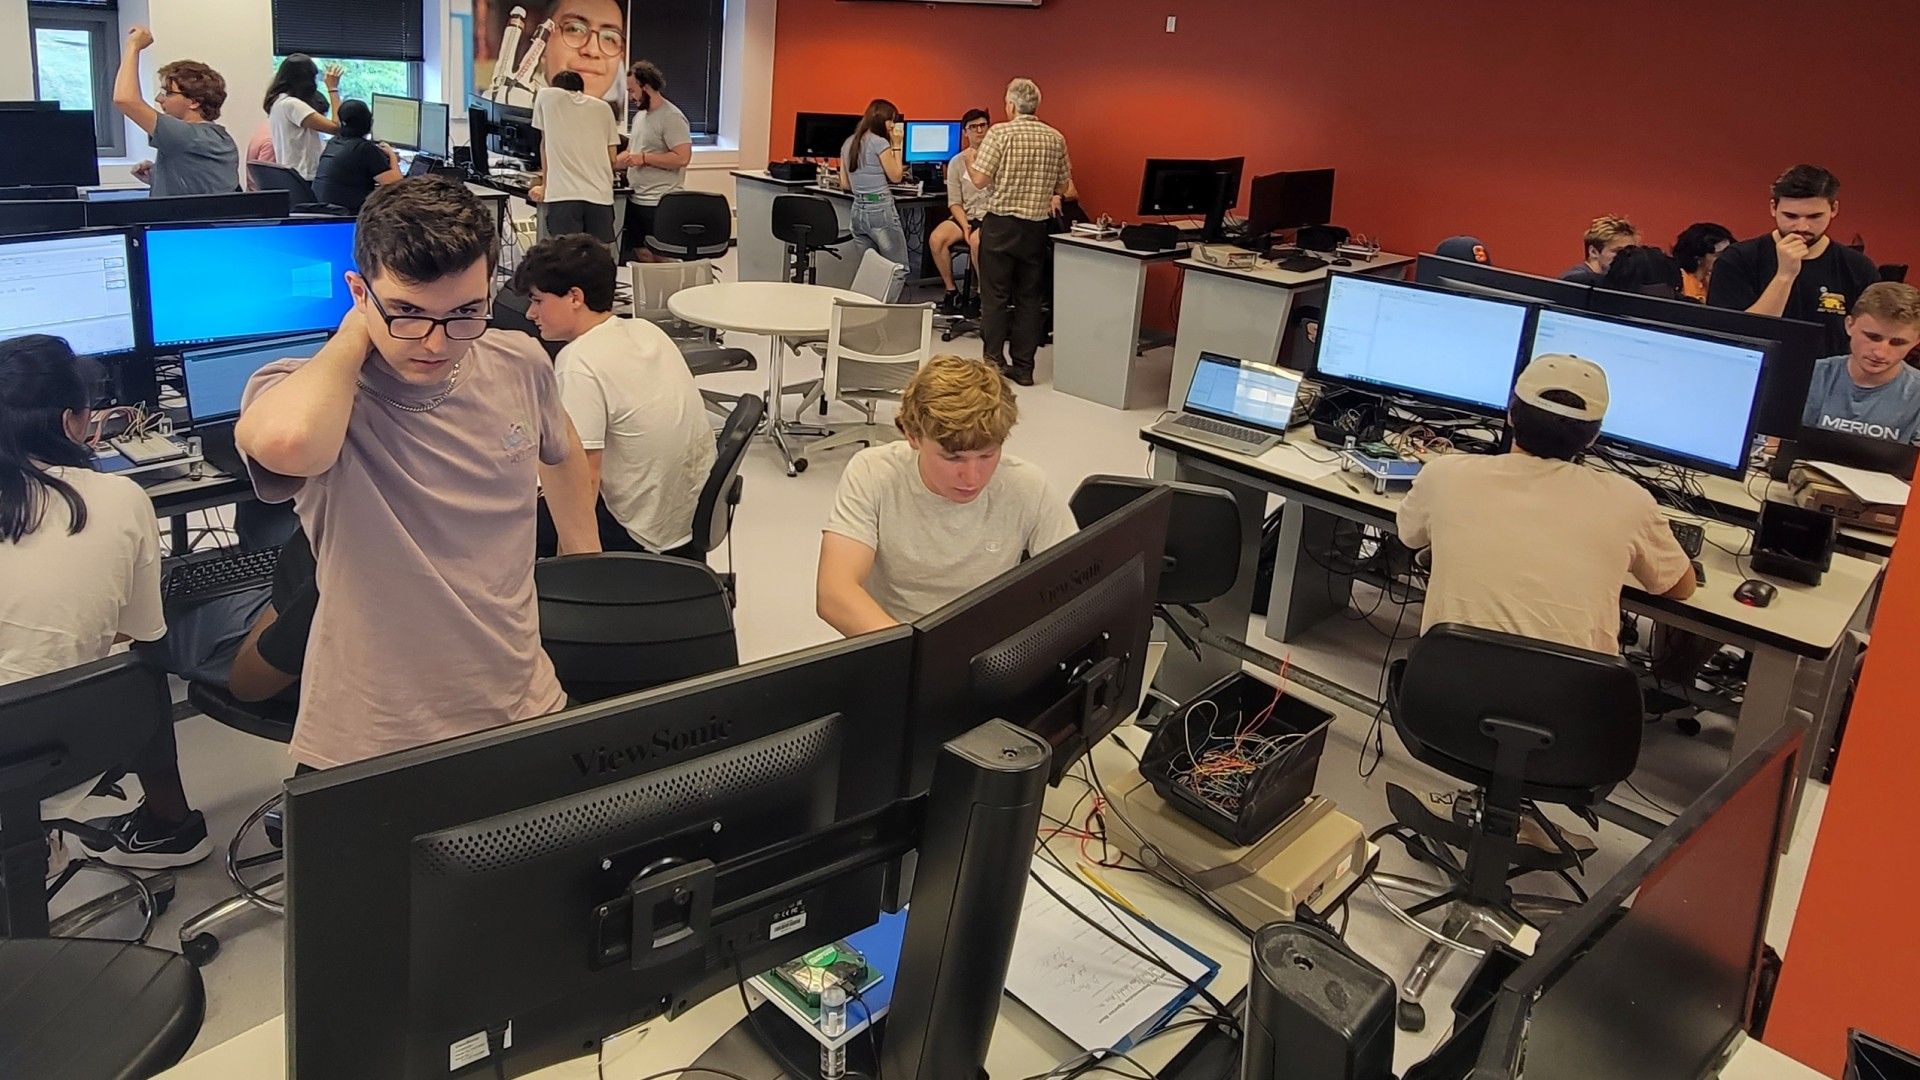 A large group of ECS students working on projects at computers